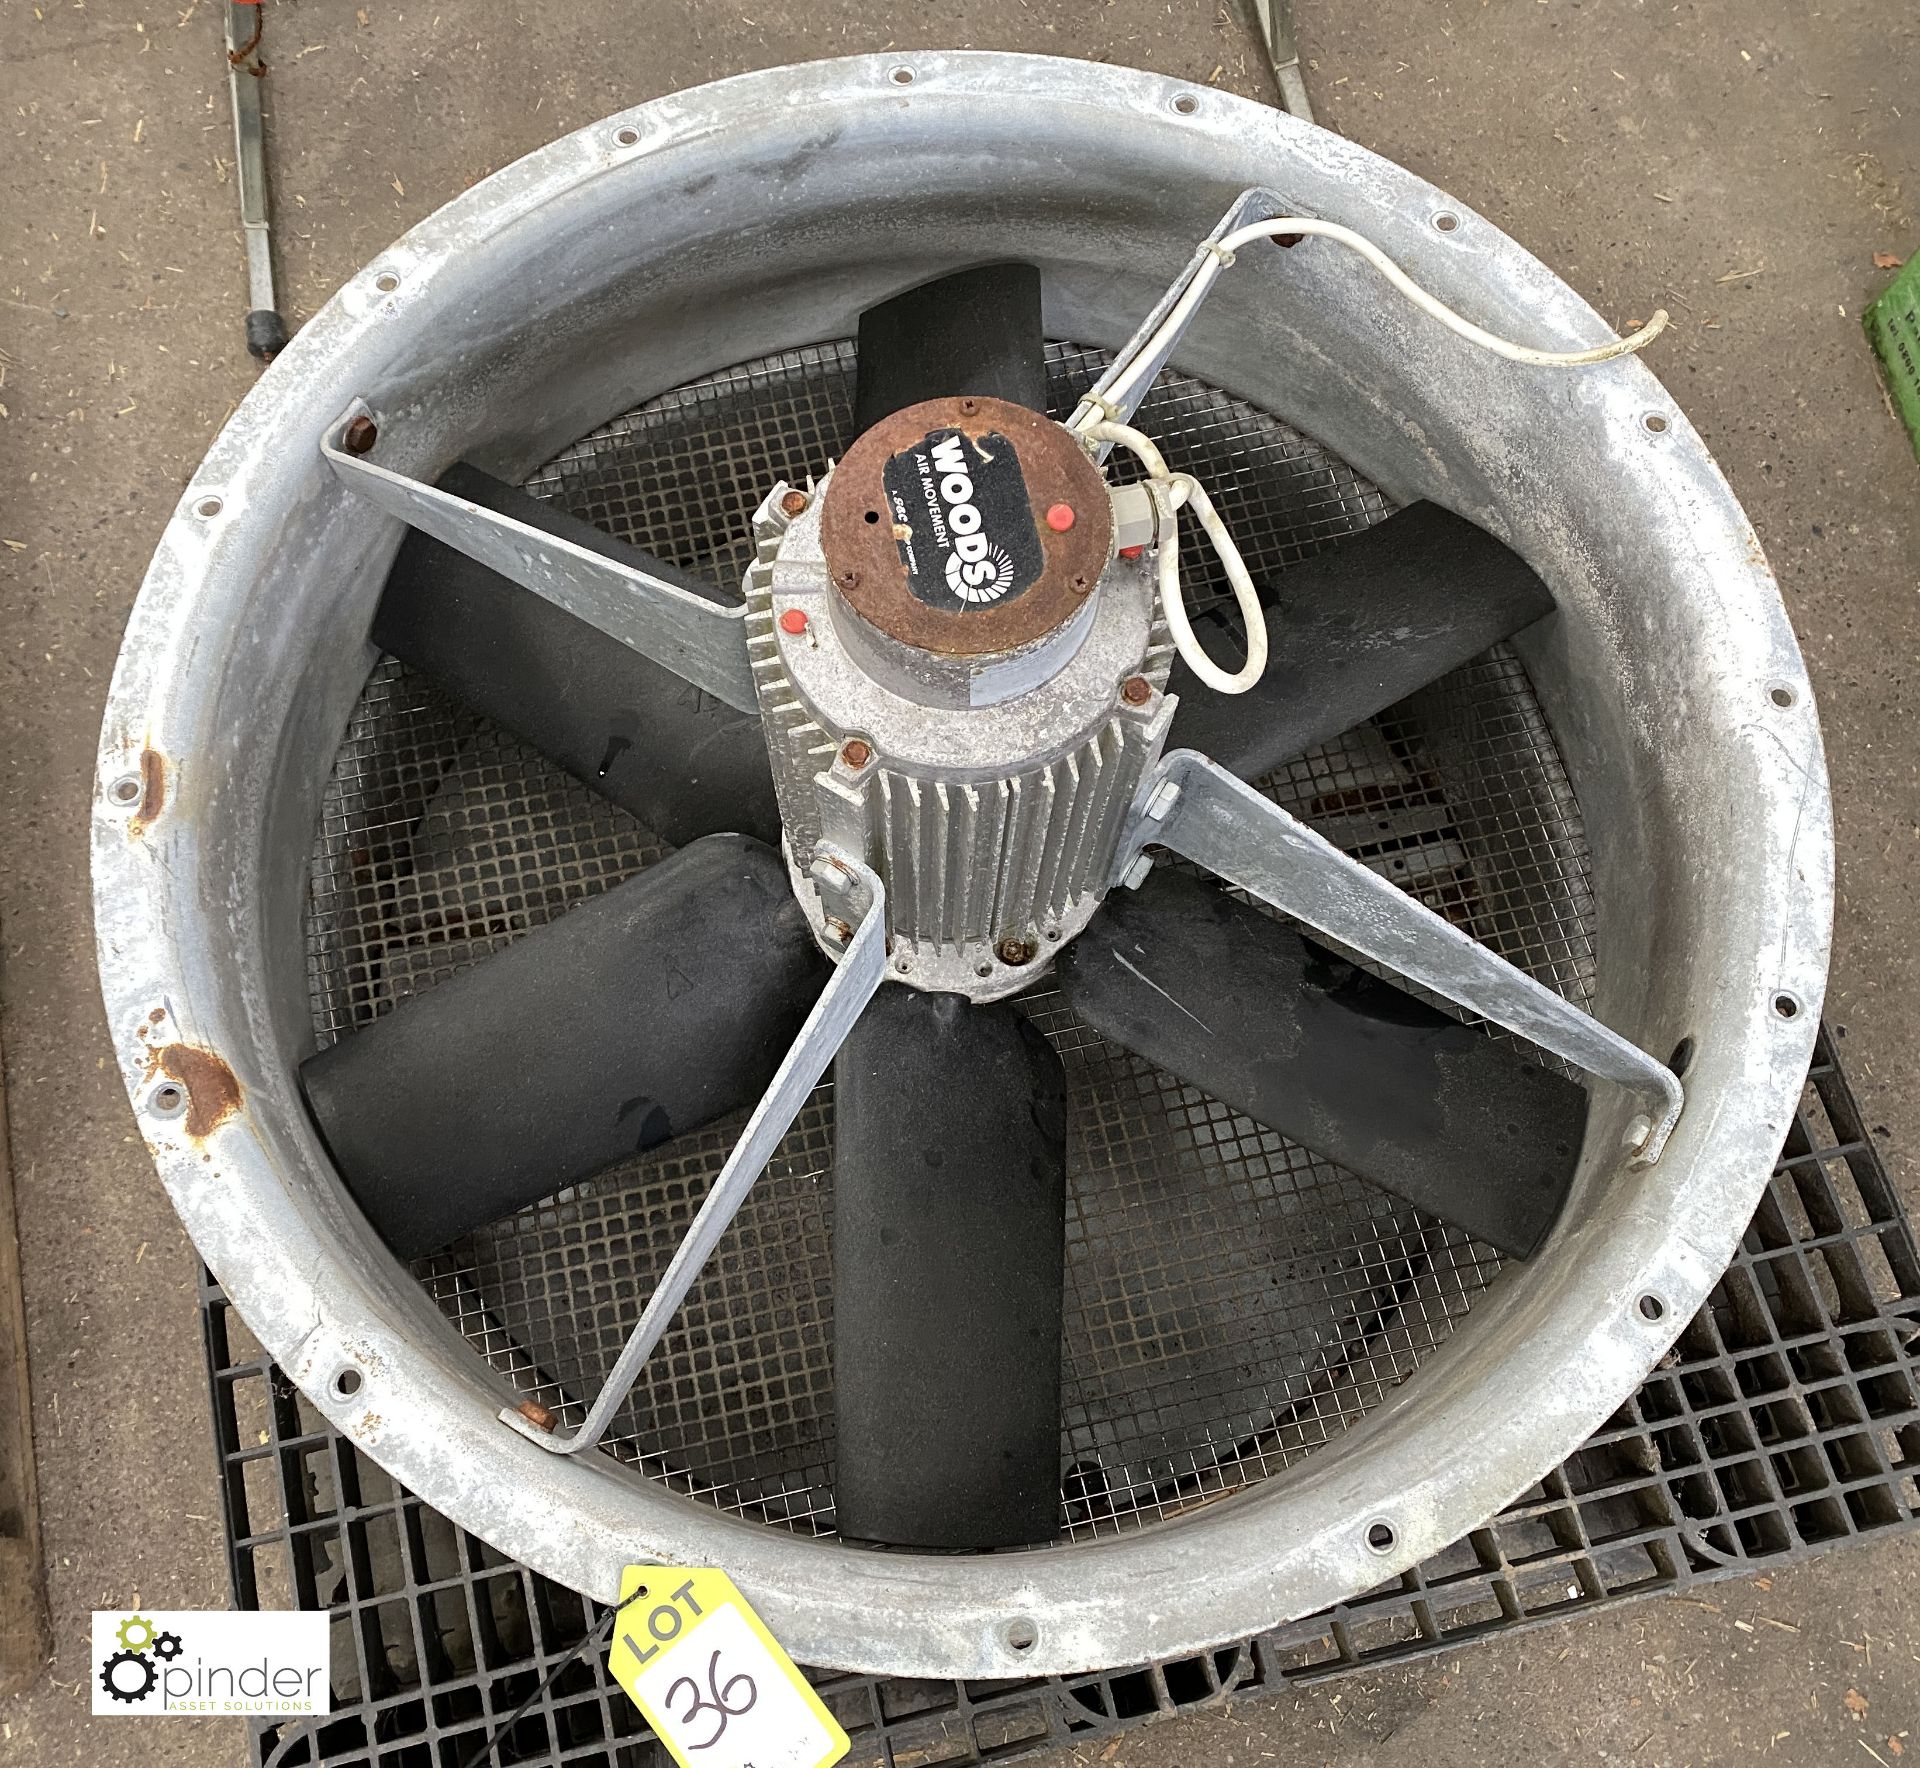 Woods Circulating Fan, 800mm diameter, 240volts (please note this lot has a lift out fee of £5 - Image 2 of 3